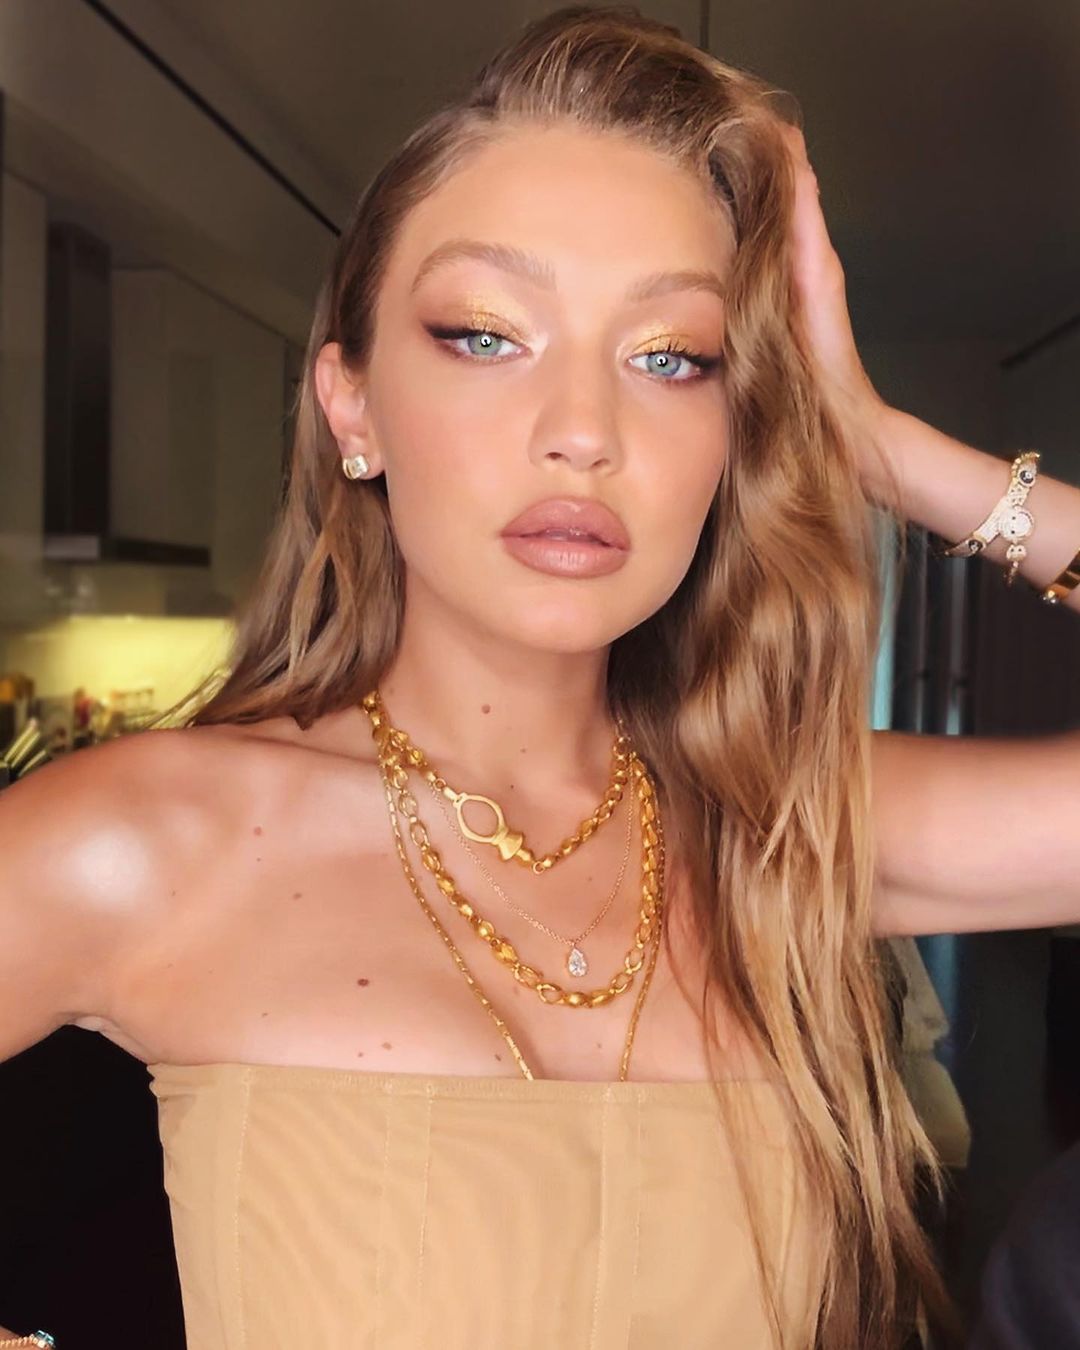 Sports Illustrated Swimsuit Set Instagram on Fire With a Throwback Look at Gigi Hadid! - Photo 1